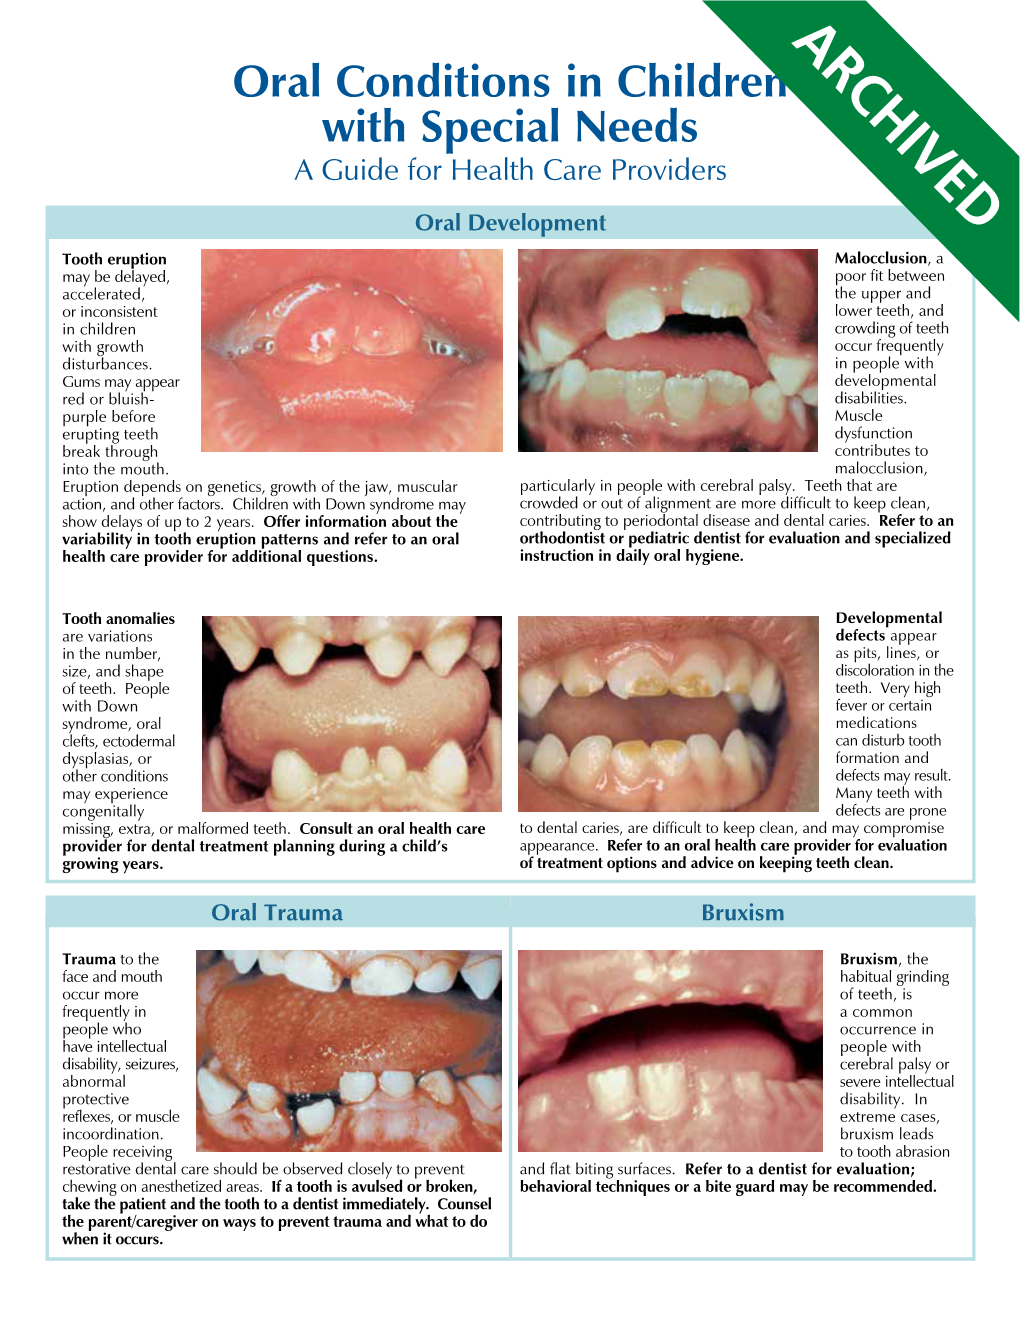 Oral Conditions in Children with Special Needs a Guide for Health Care Providers